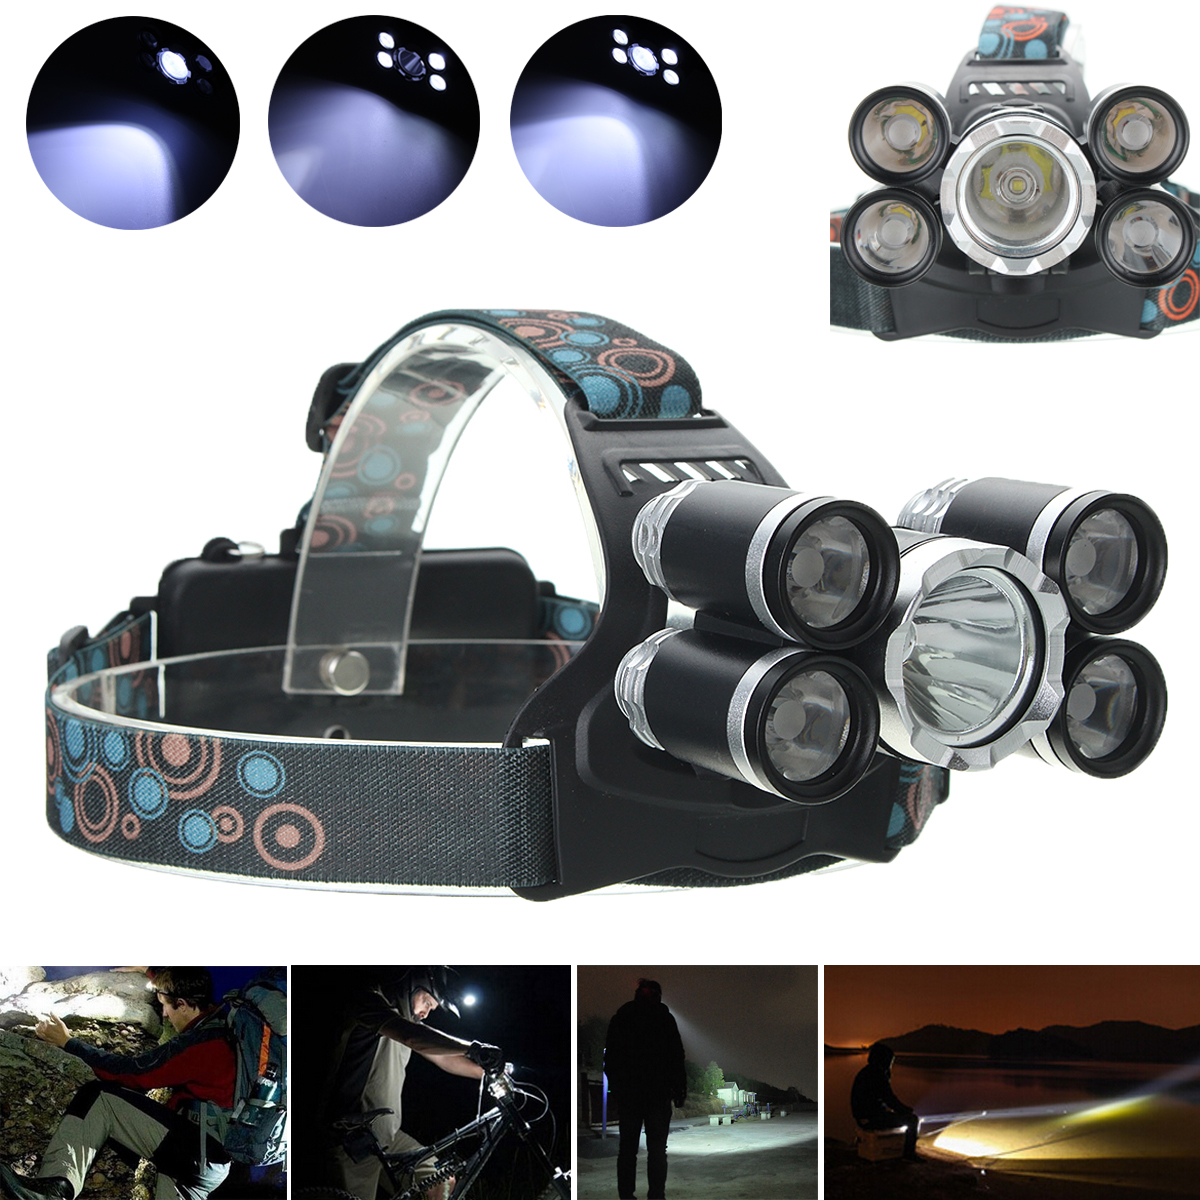 

XANES 7310-A 2500 Lumens Bicycle Headlight 4 Switch Modes Rotate Zoom Adjustable HeadLamp